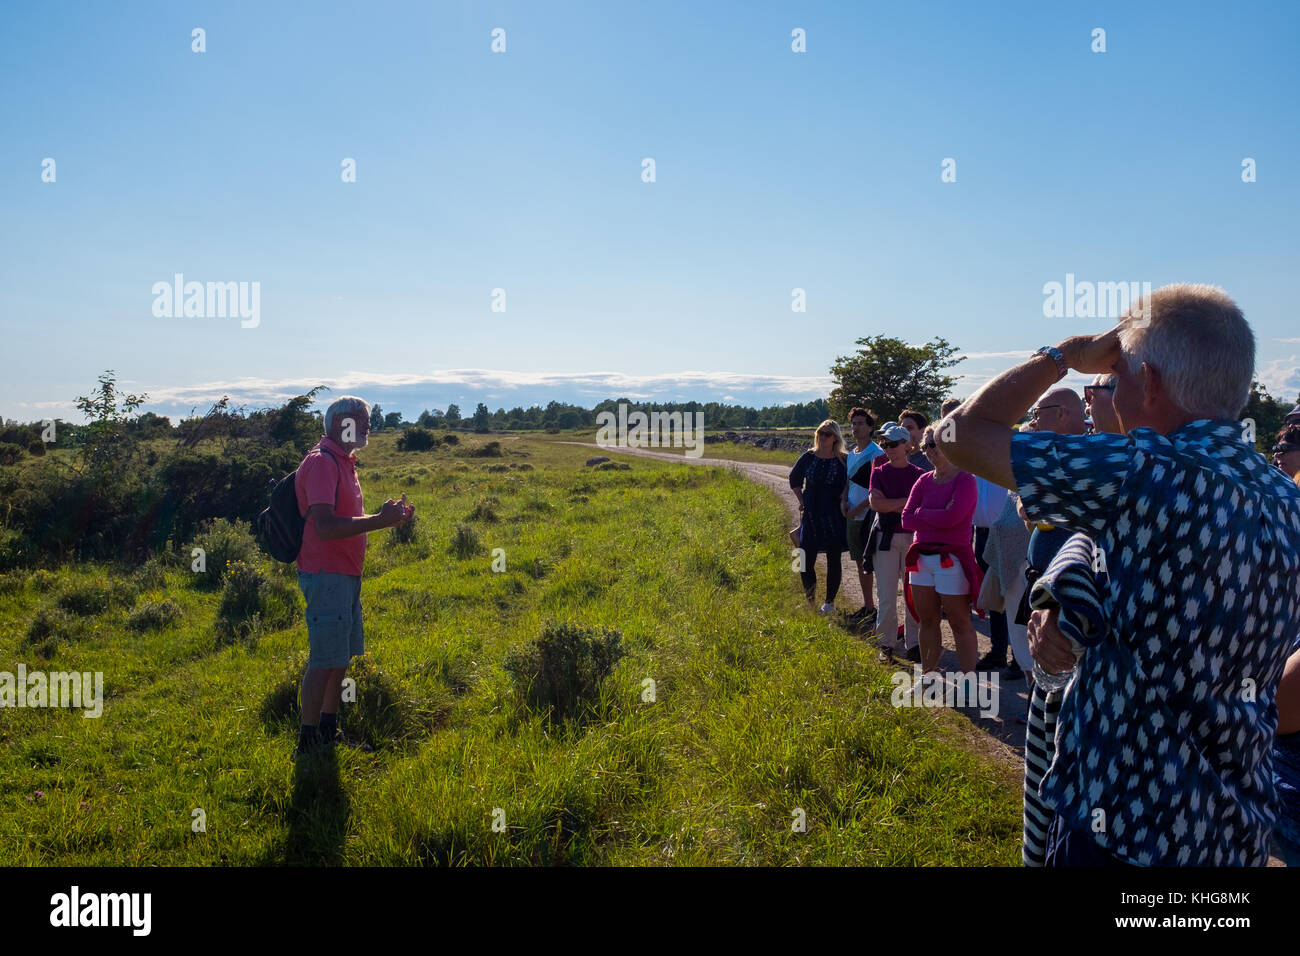 Guided tour in southern Sweden on the island Öland. Stock Photo